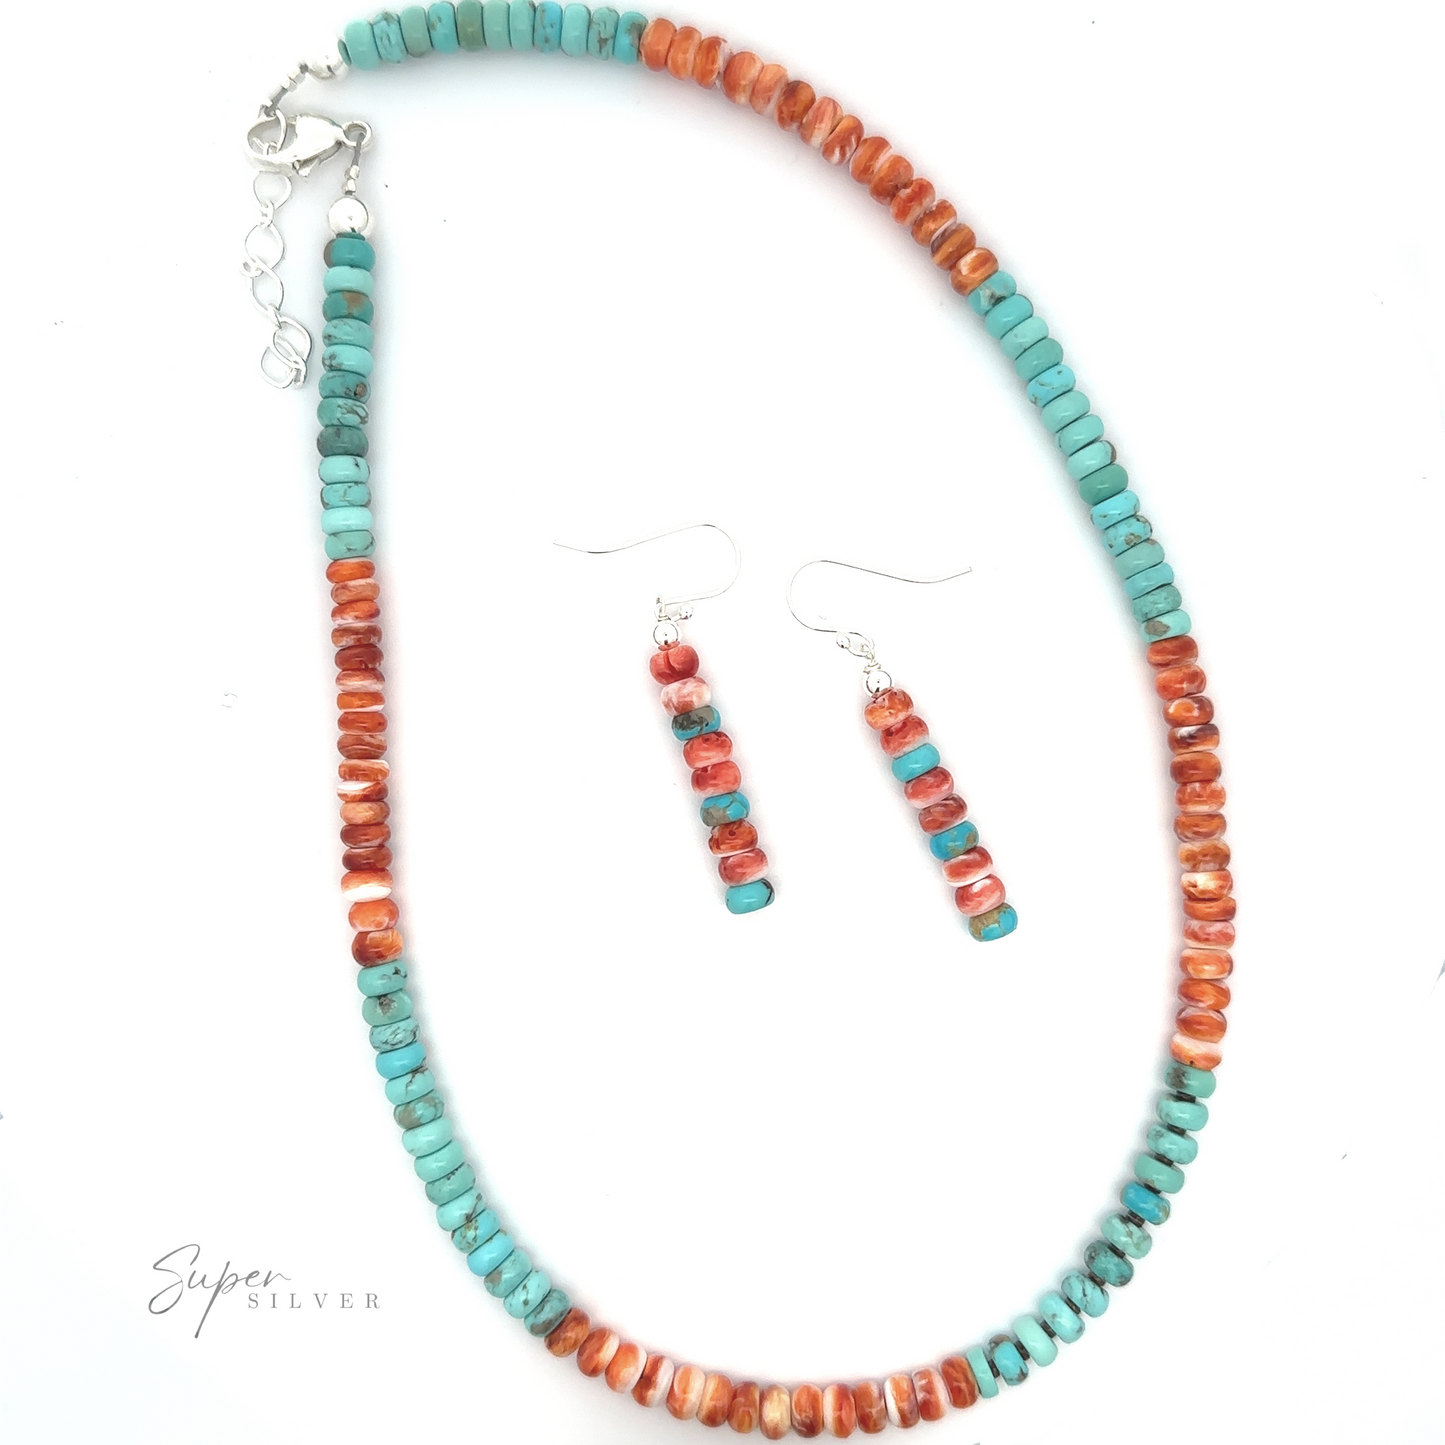 A Vibrant Turquoise and Spiny Oyster Shell Necklace and Earring Set with a necklace and matching earrings, displayed on a white background.